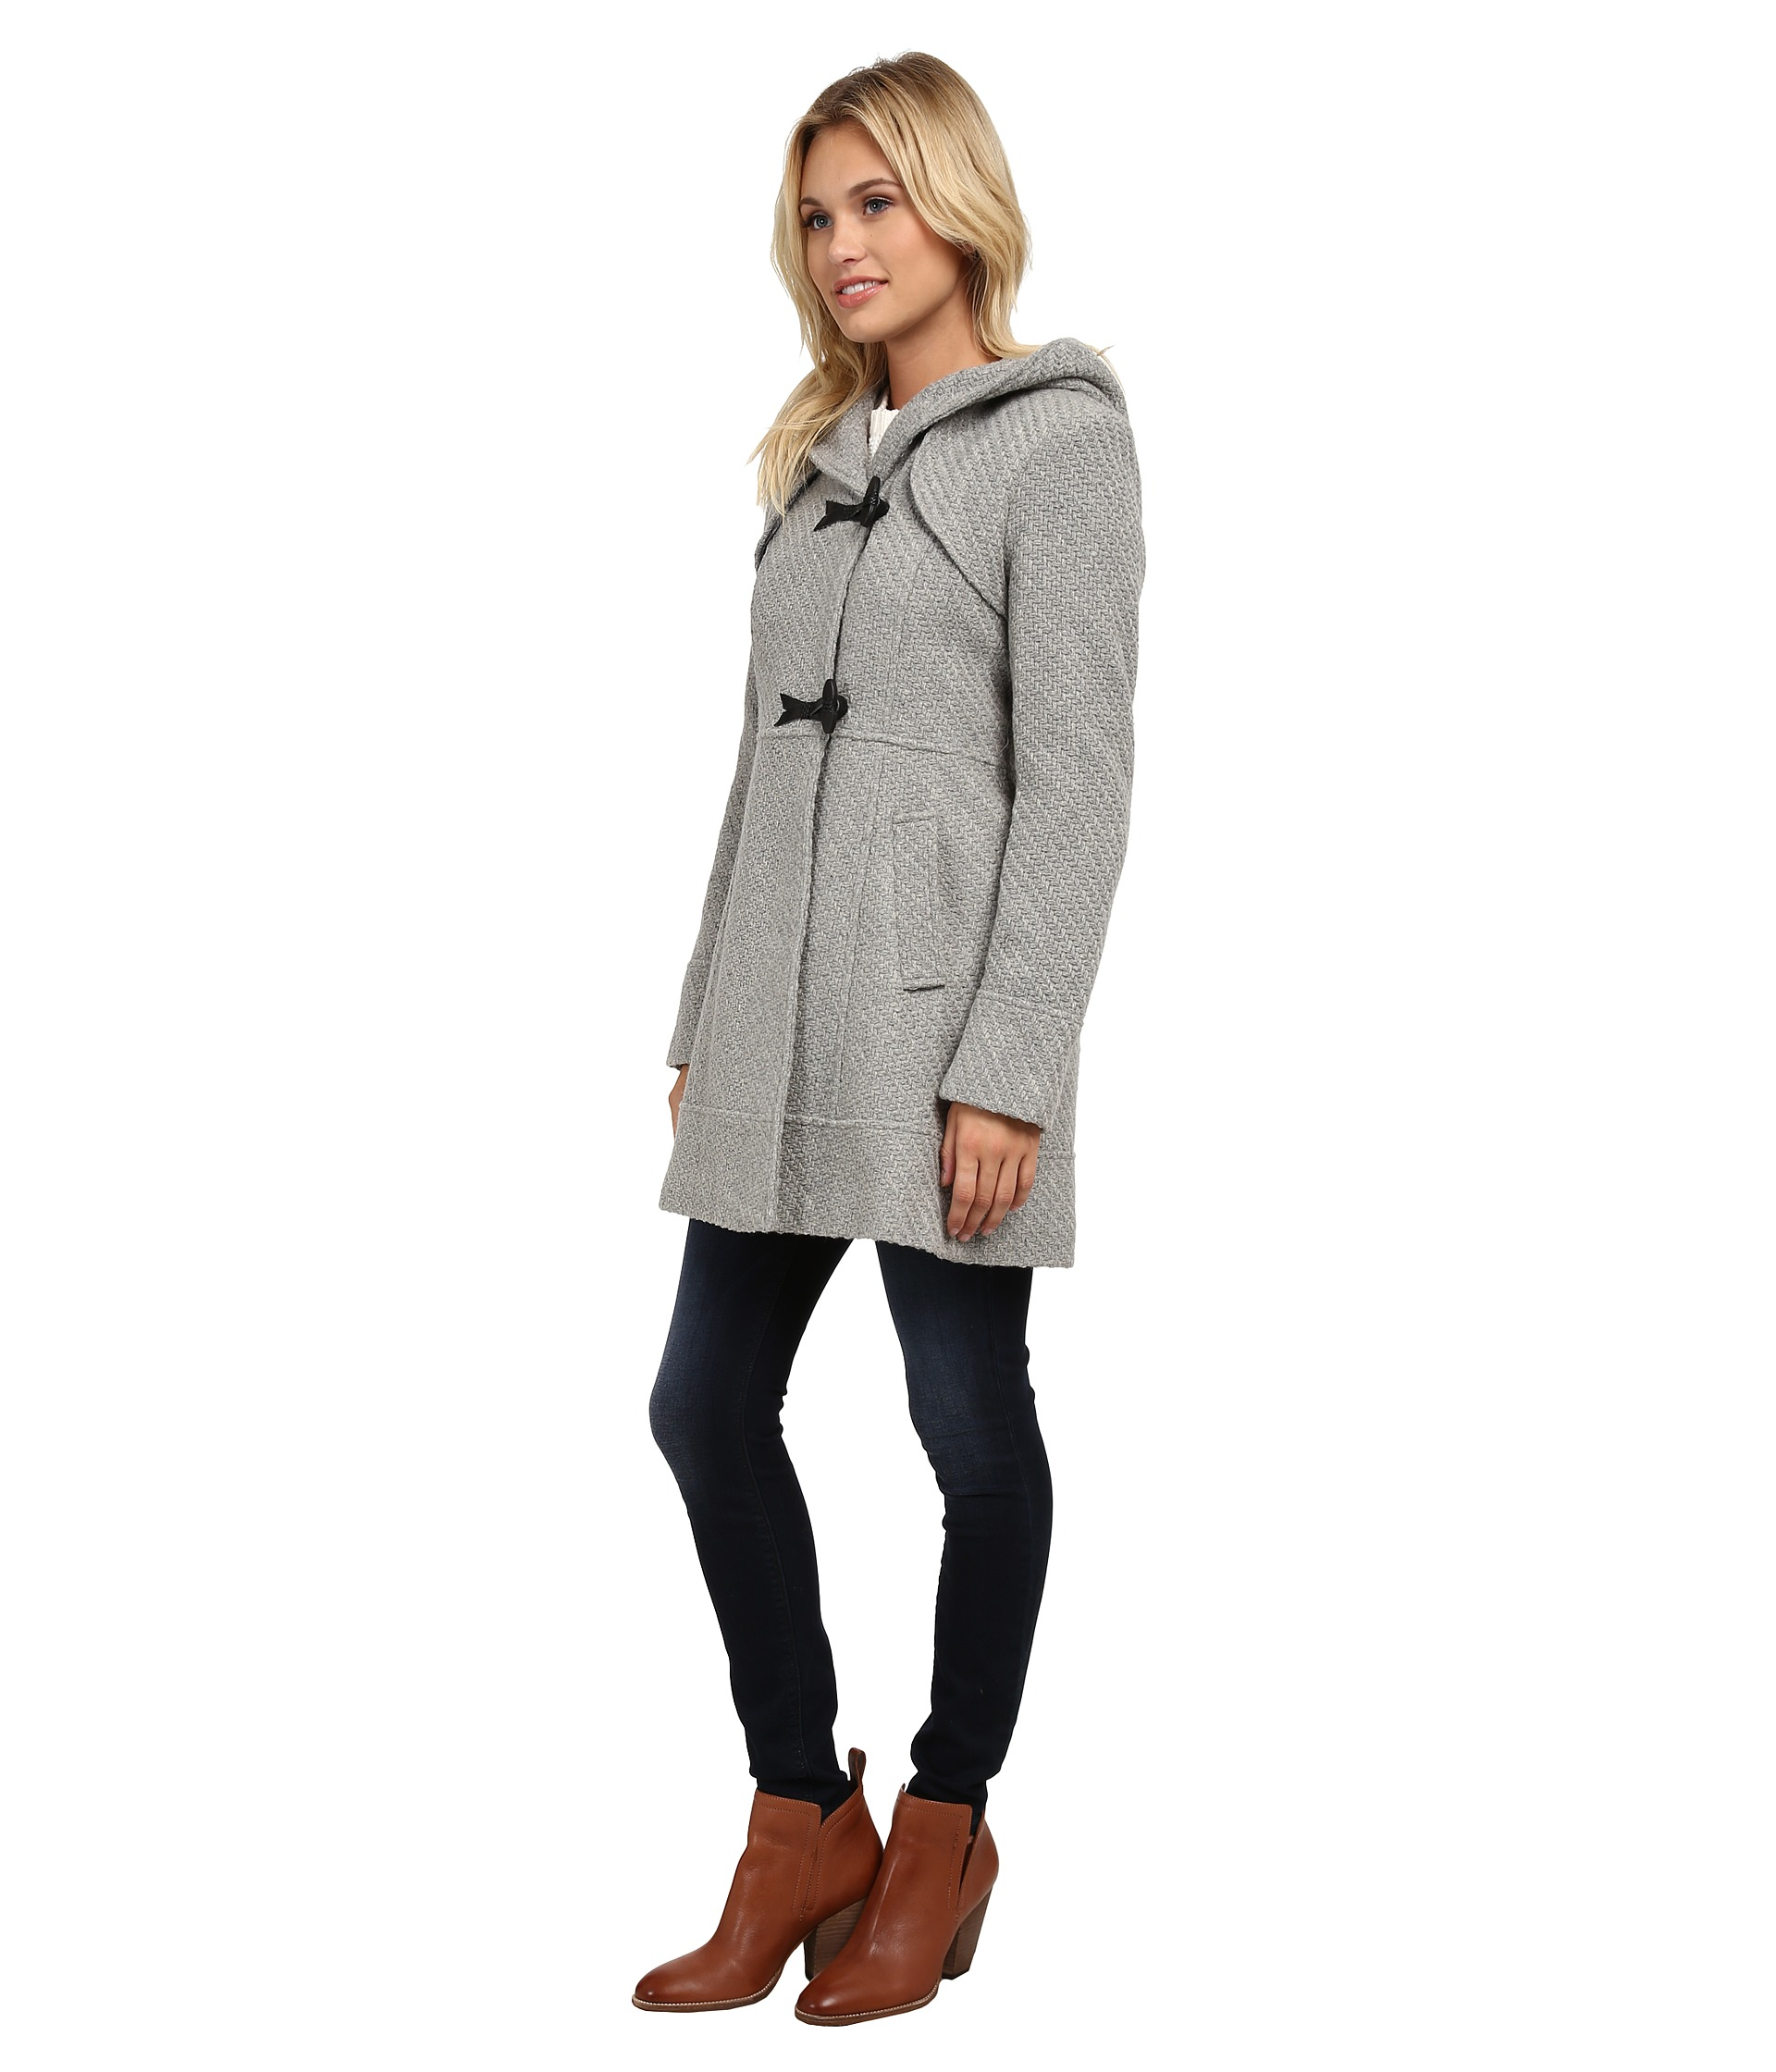 Jessica Simpson Braided Wool Duffle Coat With Hood in Gray - Lyst